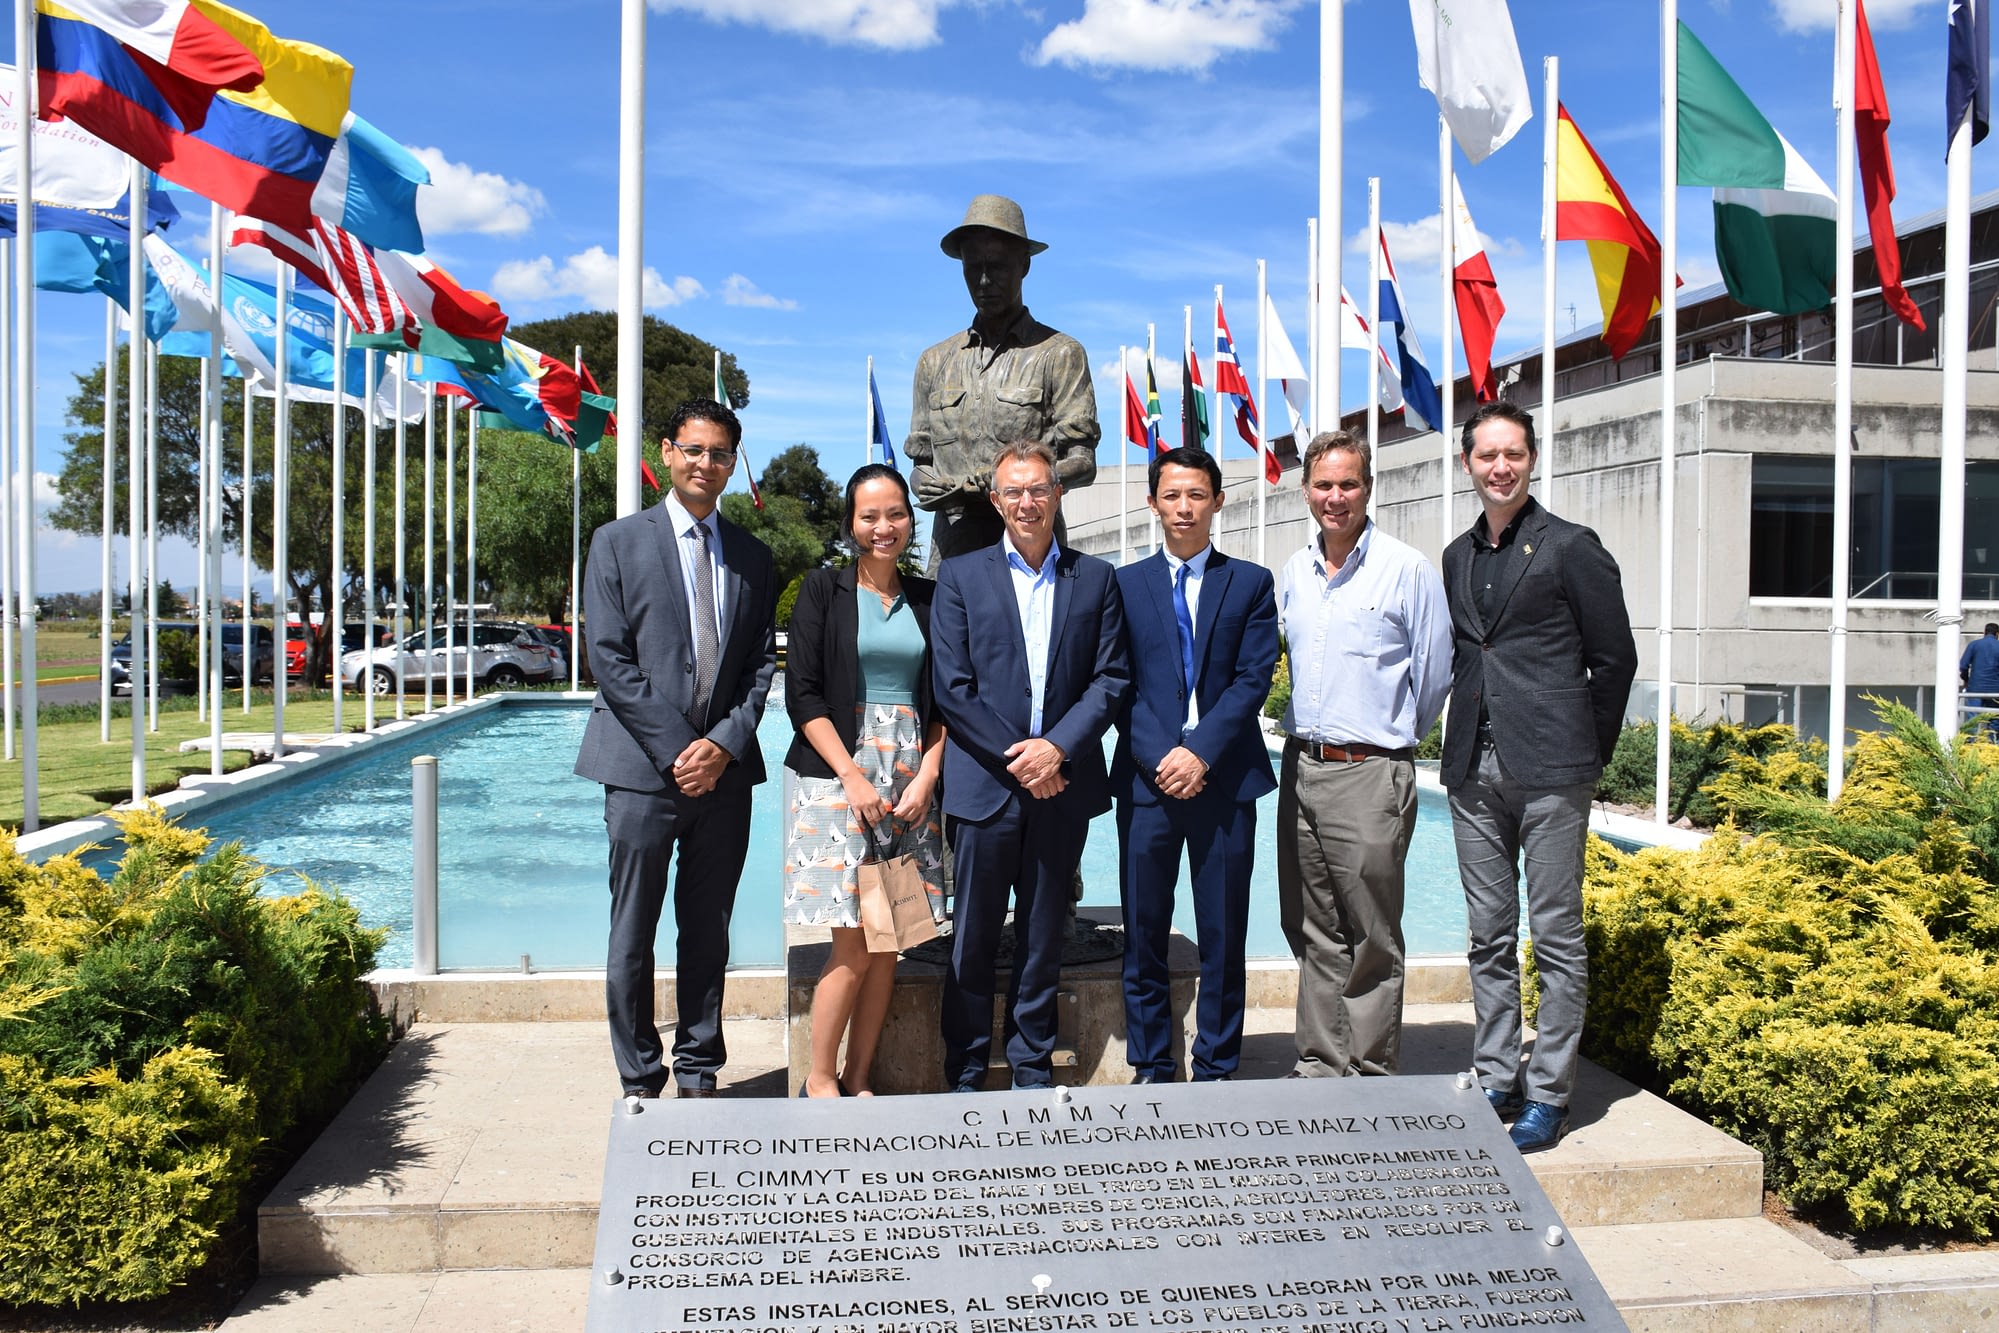 Visitors from the Embassy of Vietnam in Mexico and members of CIMMYT senior management stand for a group photograph next to the Norman Borlaug statue at CIMMYT's global headquarters. (Photo: Jose Luis Olin Martinez for CIMMYT)